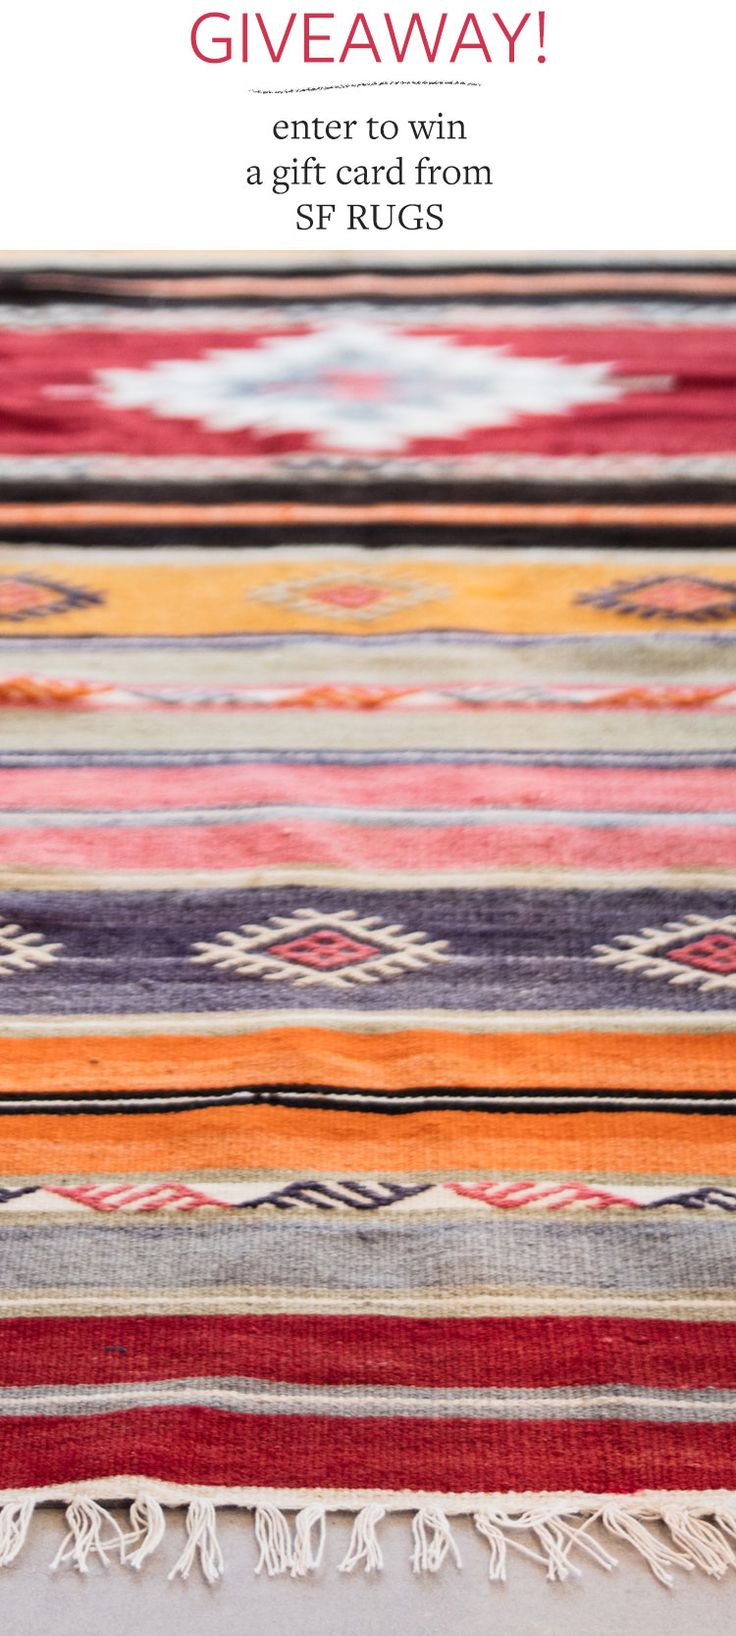 Meet SF Rugs, my new favorite source for antique and vintage rugs, plus enter to...